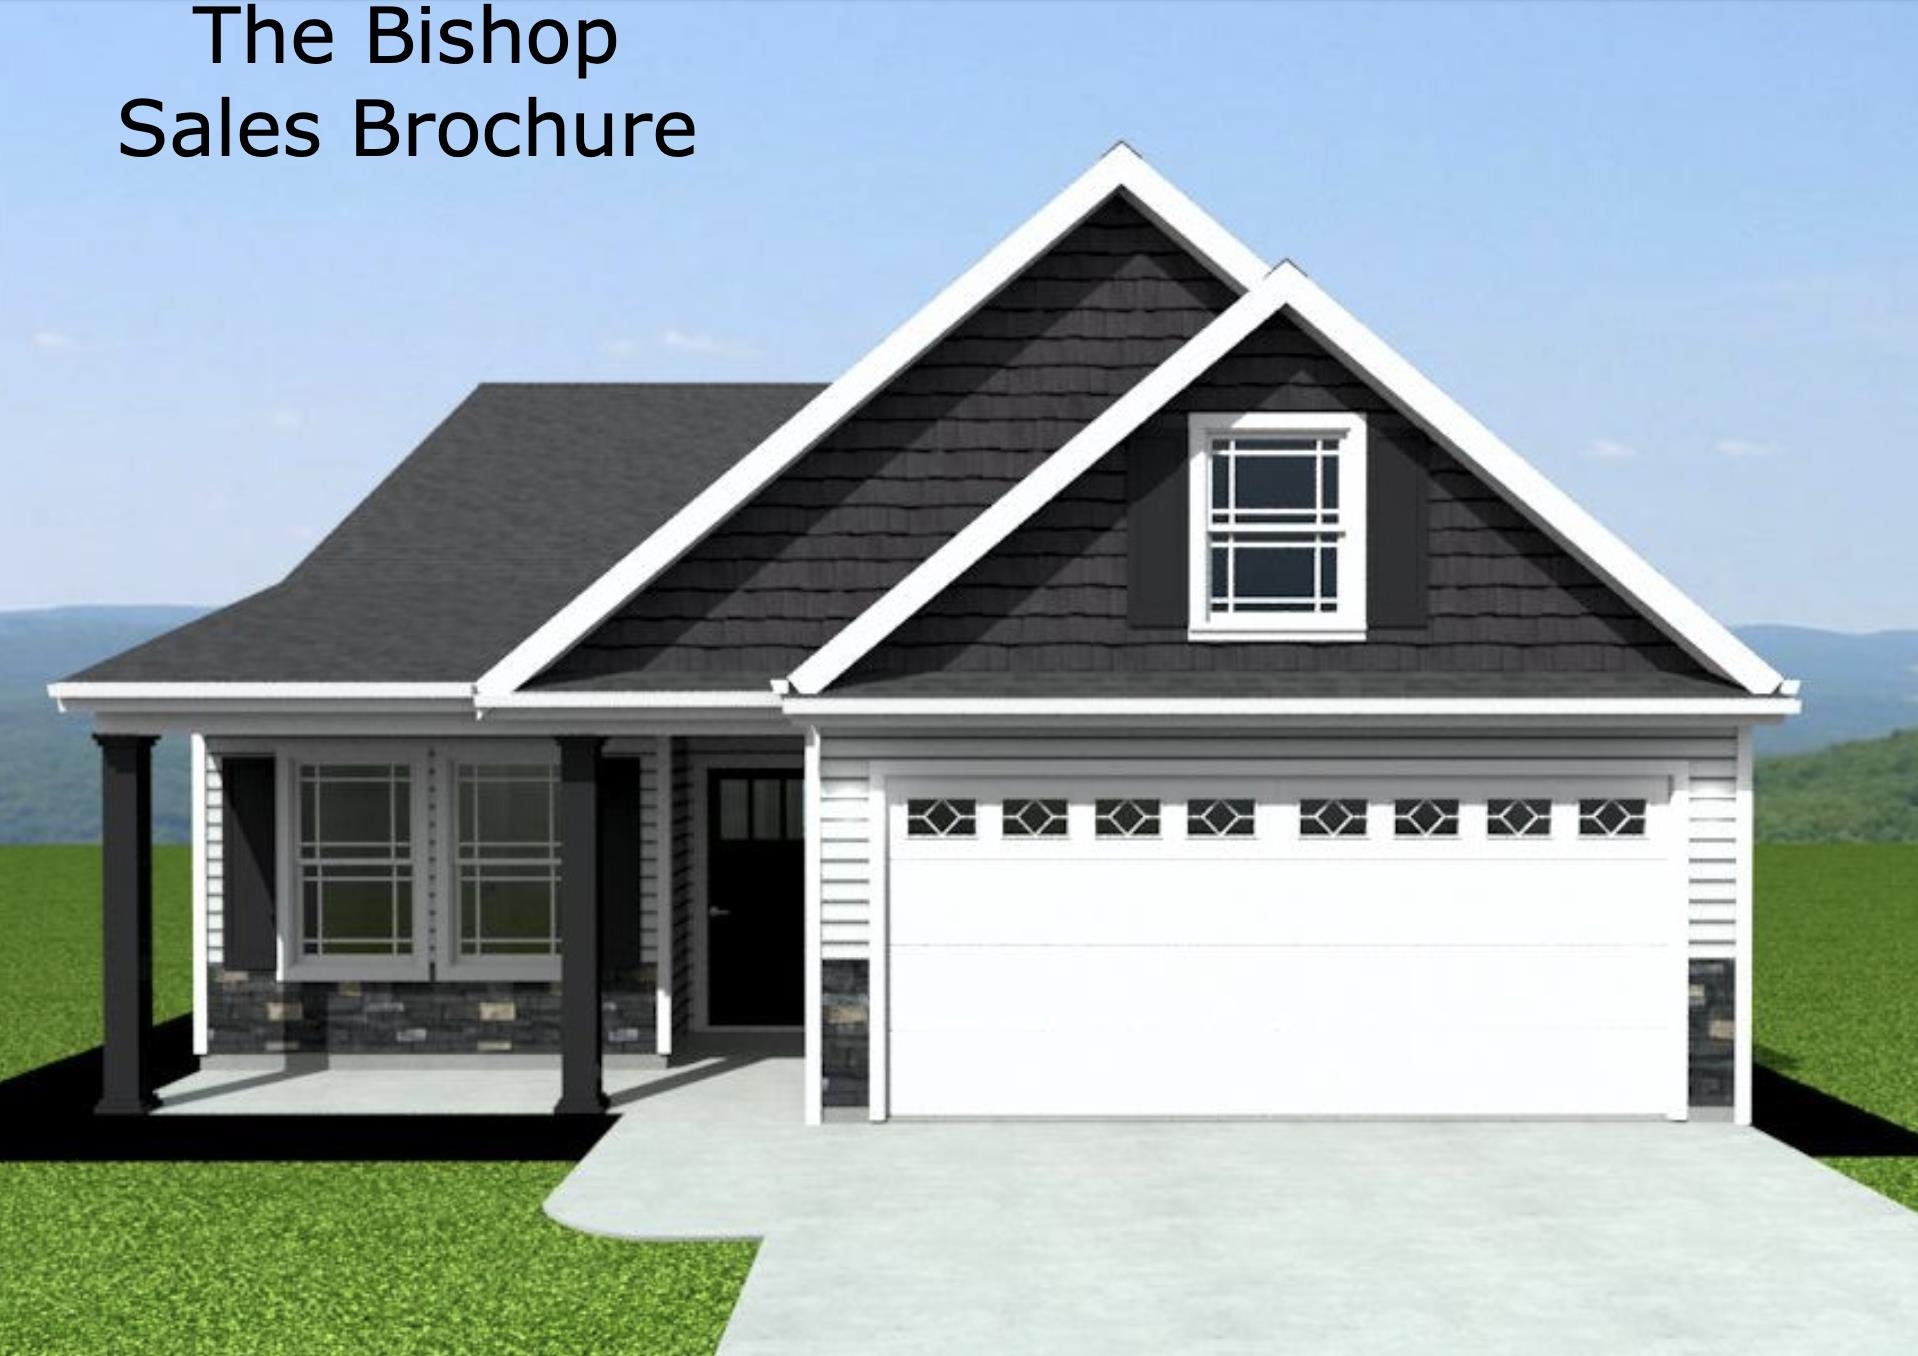 Lot 24 - The Bishop plan offers a beautiful, modern layout. Kitchen open to living area.  Home complete with the trademark chair rail, crown molding, and rope lighting.  Also includes a 12x12 sunroom with 19x12 covered patio.